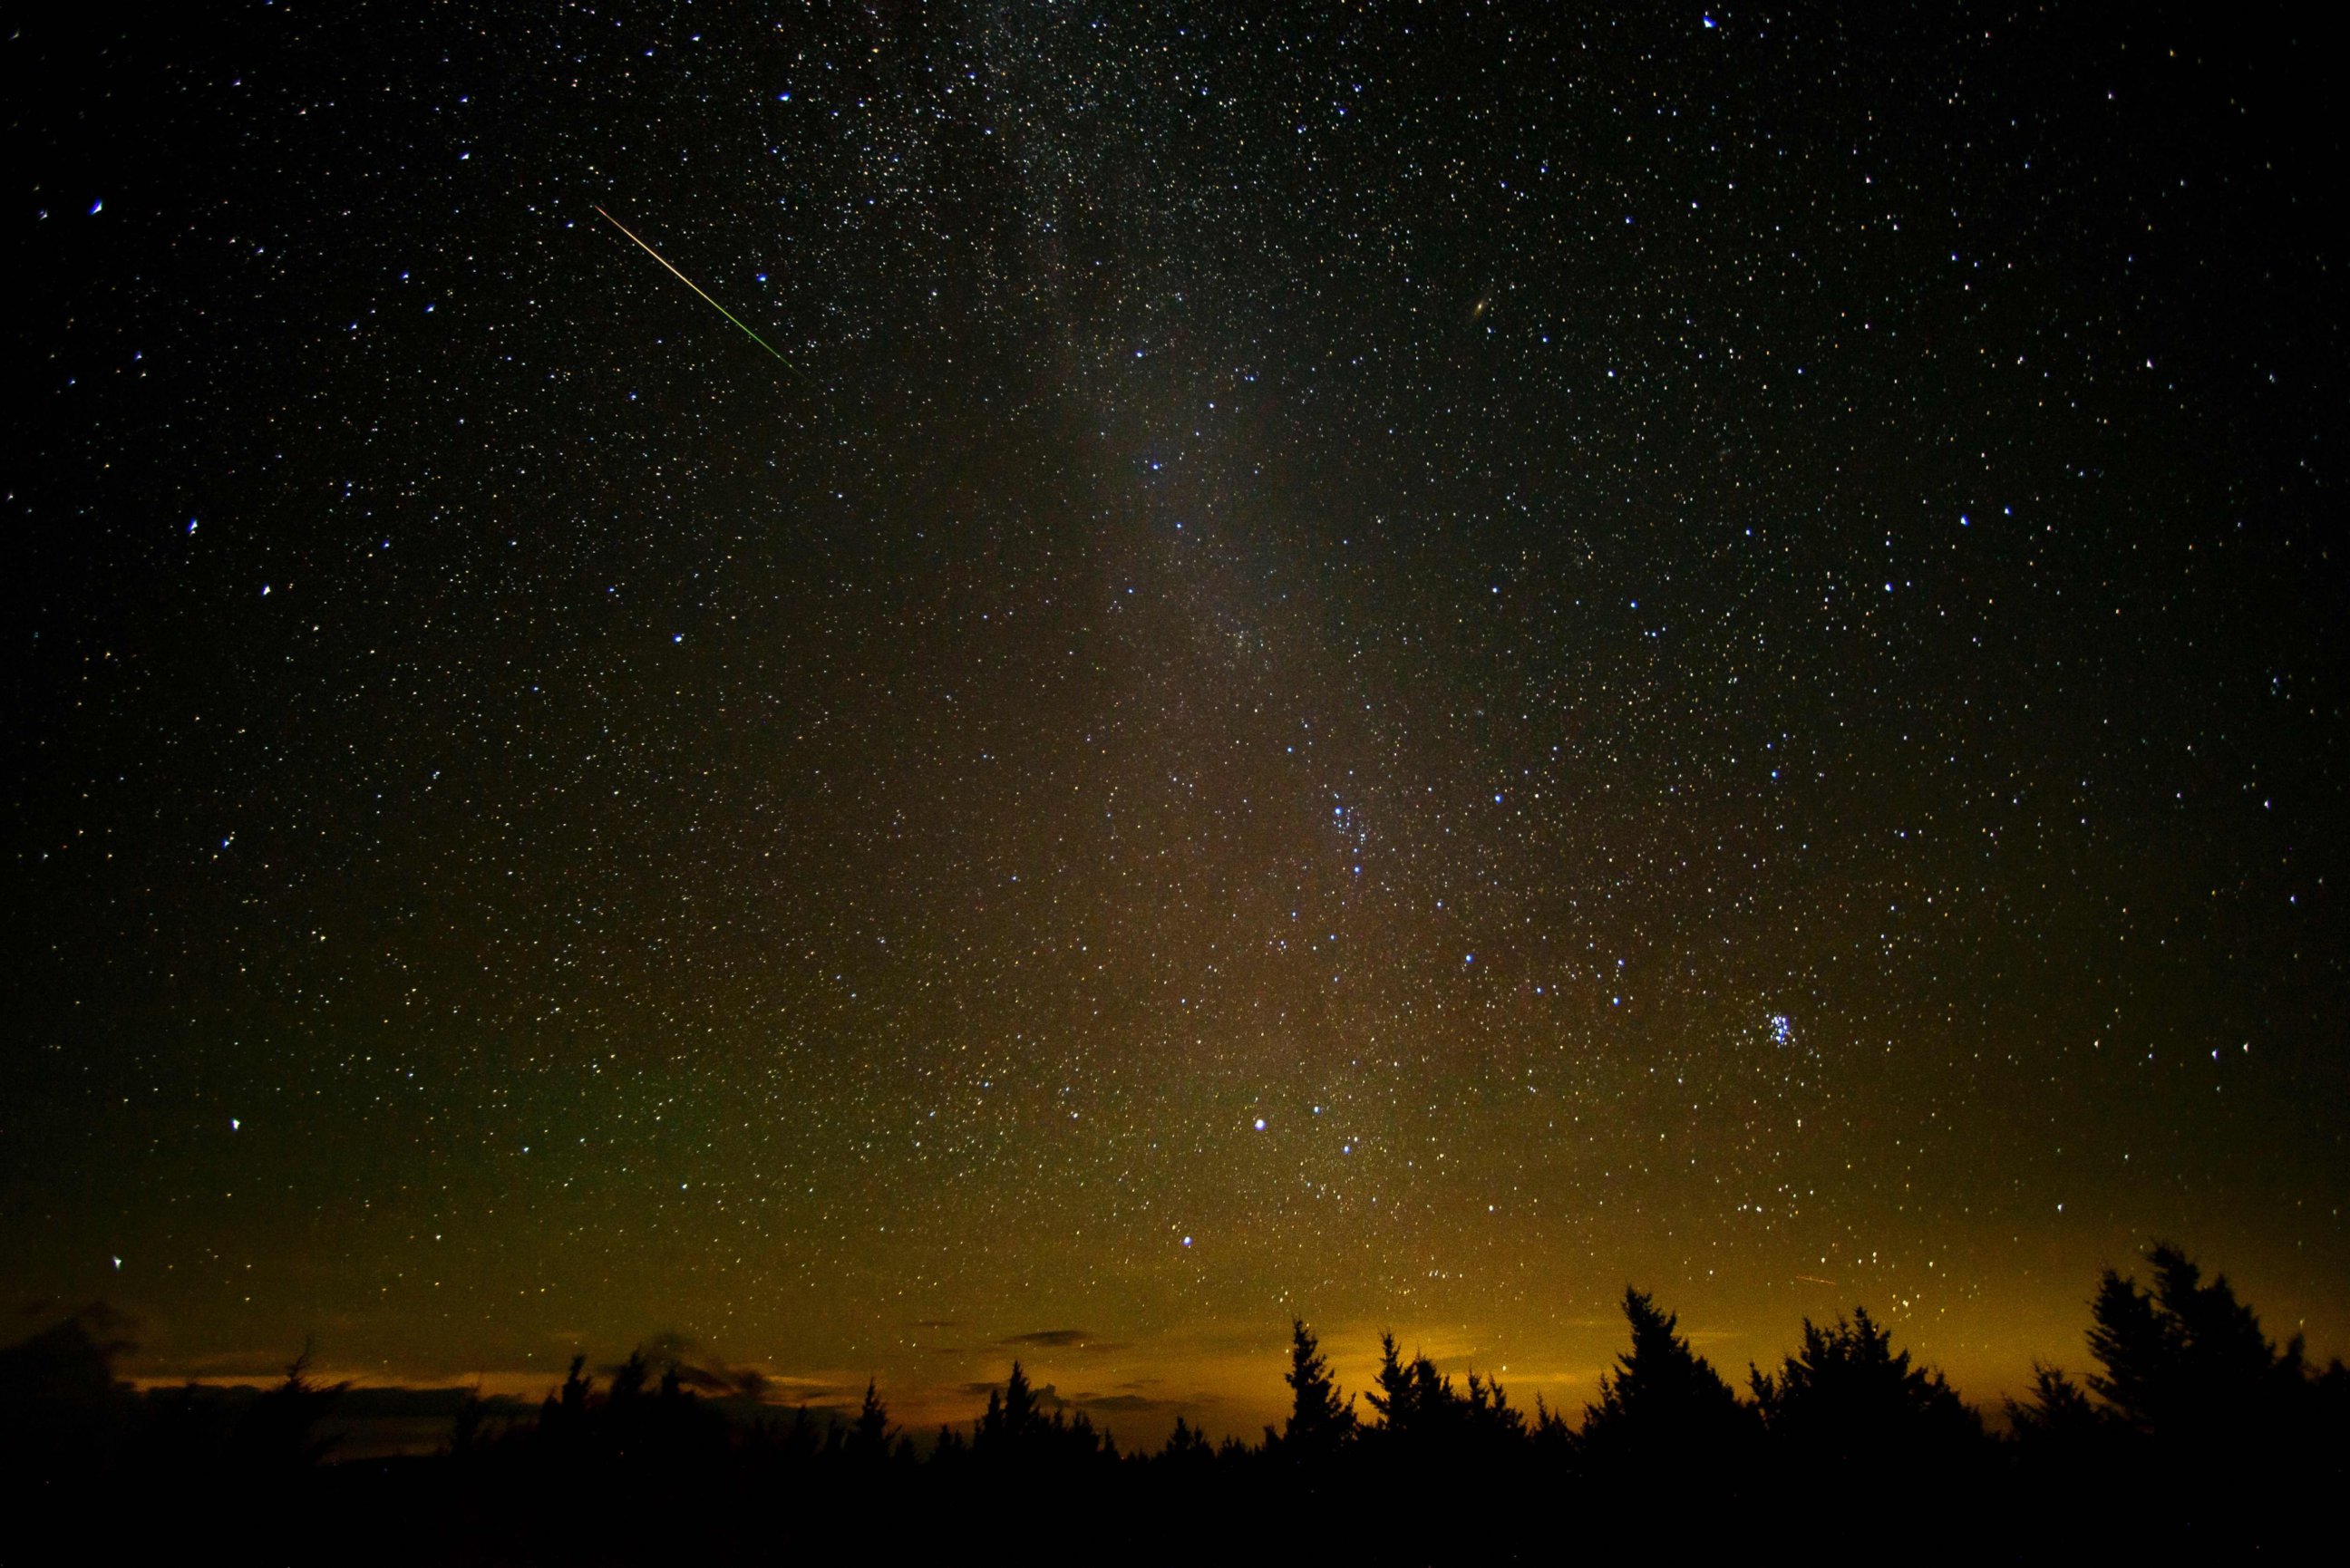 PHOTO: This NASA photo shows  a 30 second exposure meteor as it streaks across the sky during the annual Perseid meteor shower, Aug. 12, 2016, in Spruce Knob, West Virginia.   